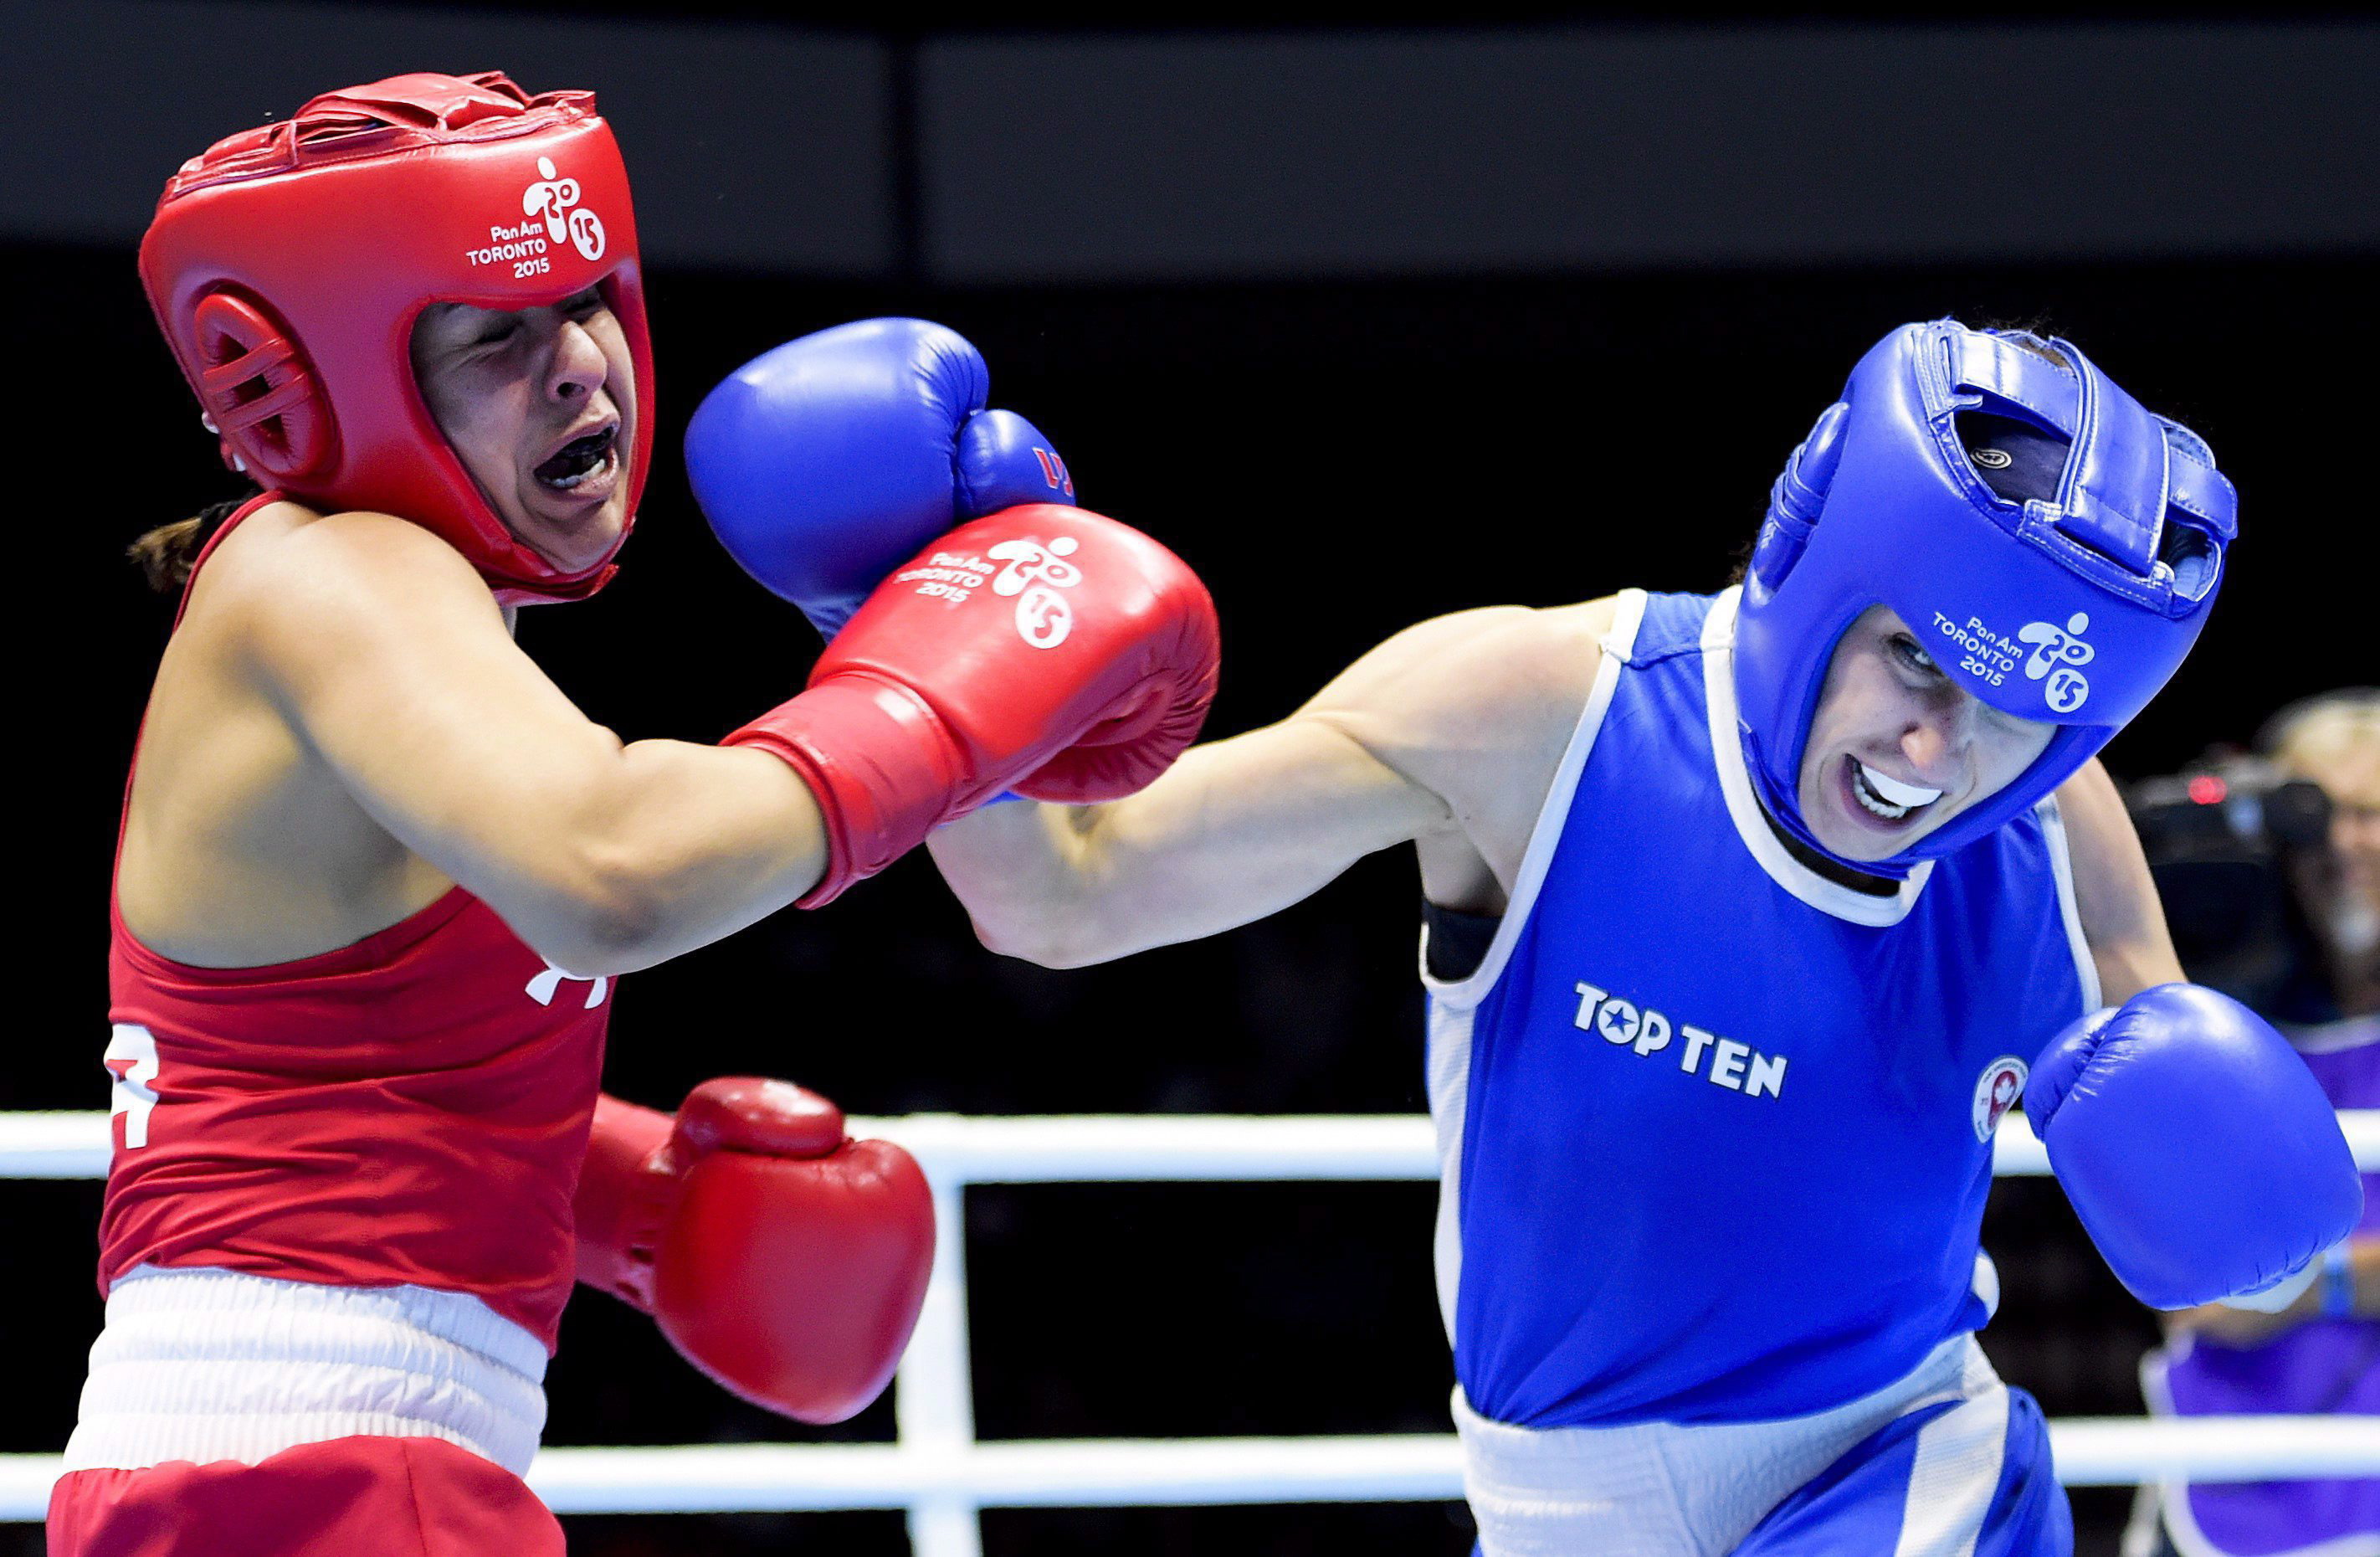 Mandy Bujold, right, of Canada, competes against Marlen Esparza, of the United States, in the women's 48-51kg flyweight gold medal boxing final during the Pan American Games in Oshawa, Ontario, on Thursday, July 25, 2015. Bujold won gold. THE CANADIAN PRESS/Nathan Denette